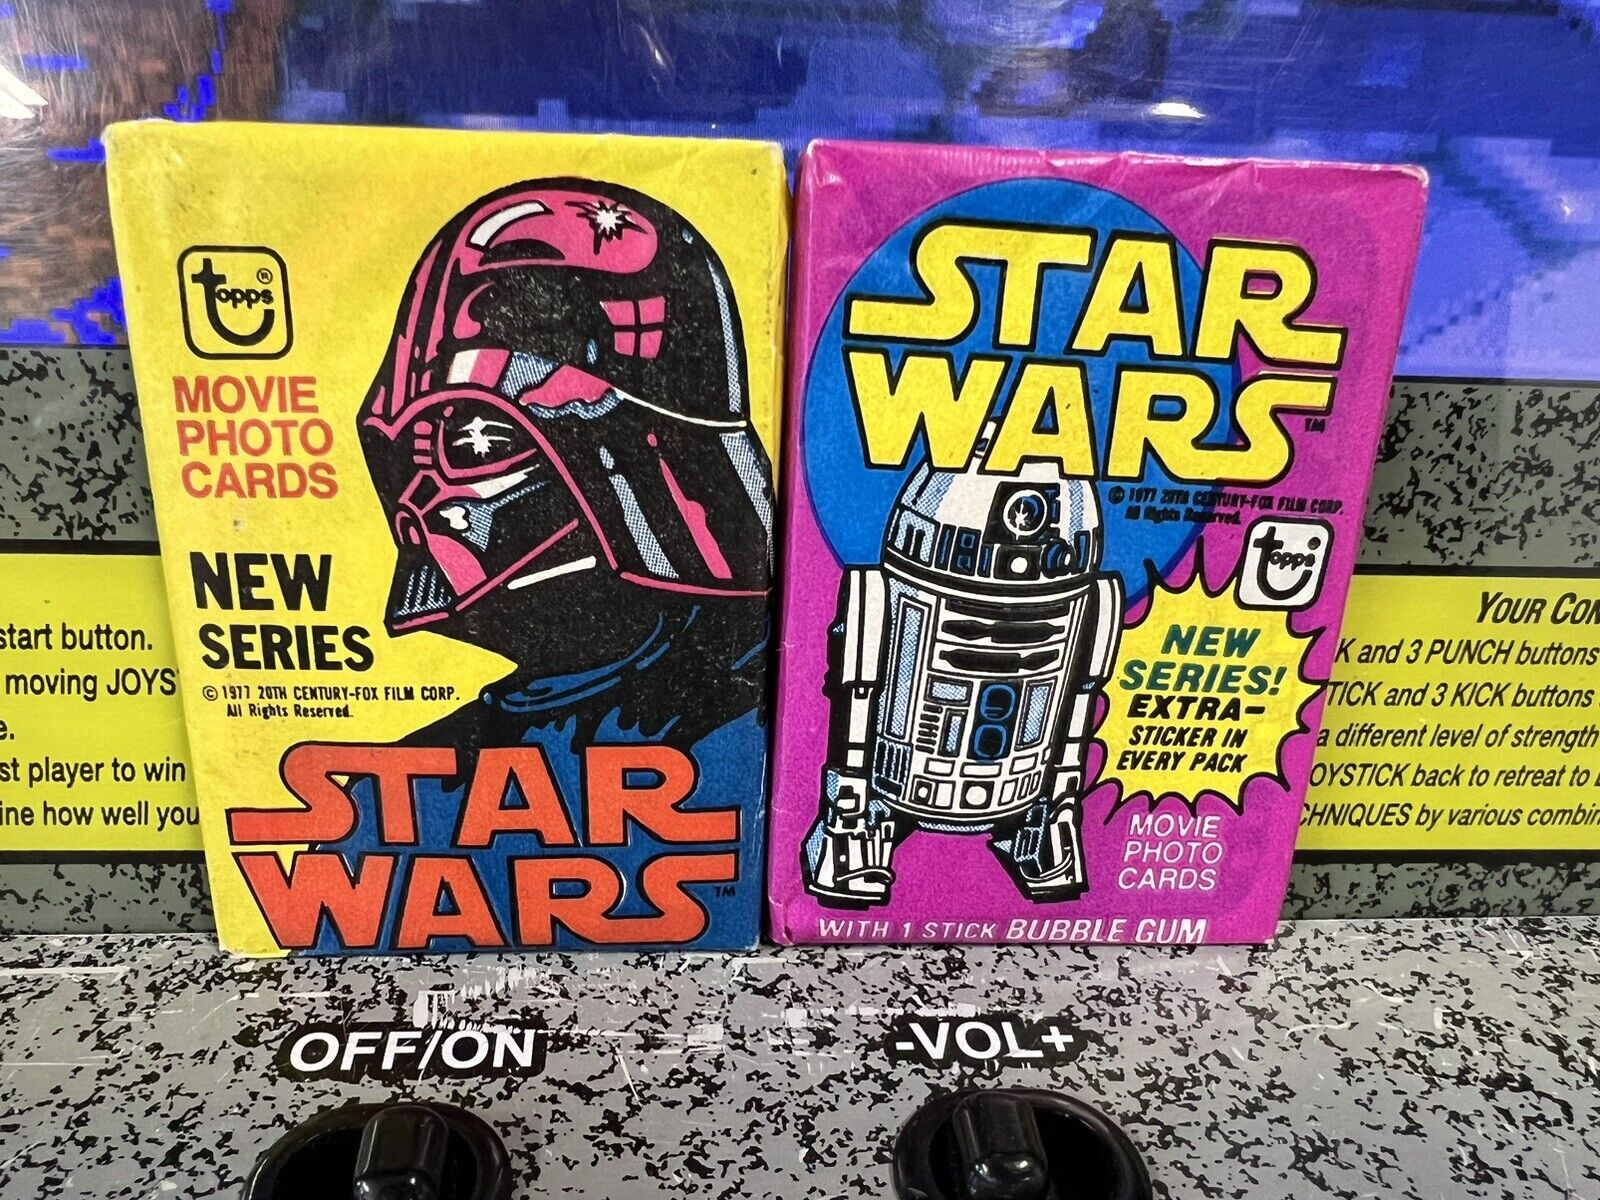 Lot of 2: 1977 Topps Star Wars Wax Packs Series 2 and 3 BRAND NEW SEALED